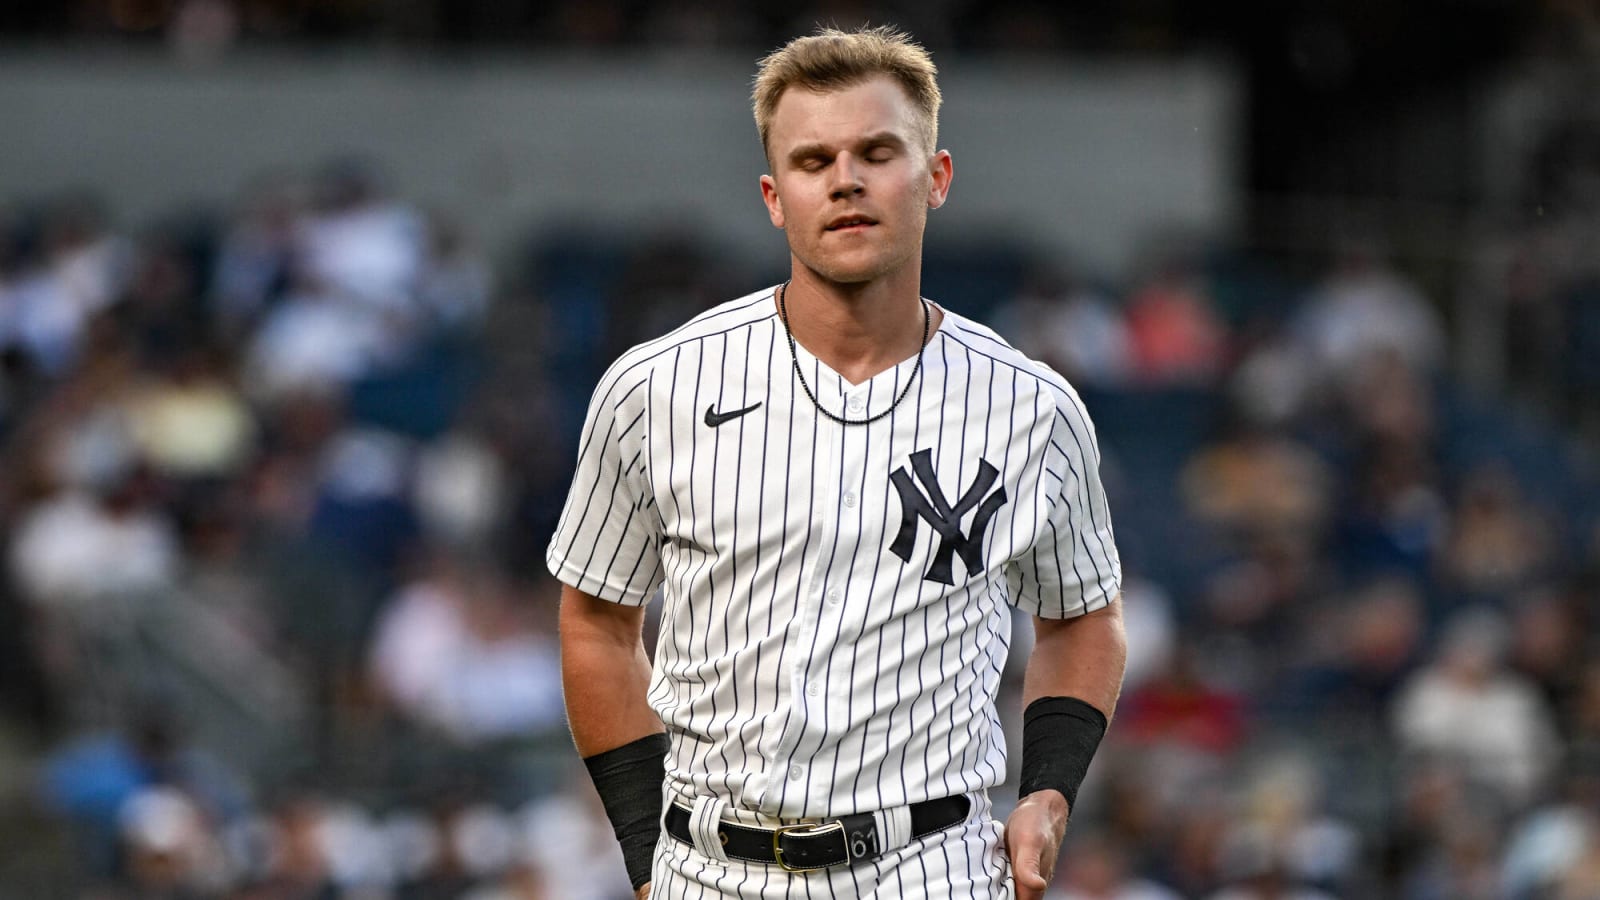 Yankees stumbled upon a great outfield depth piece this season